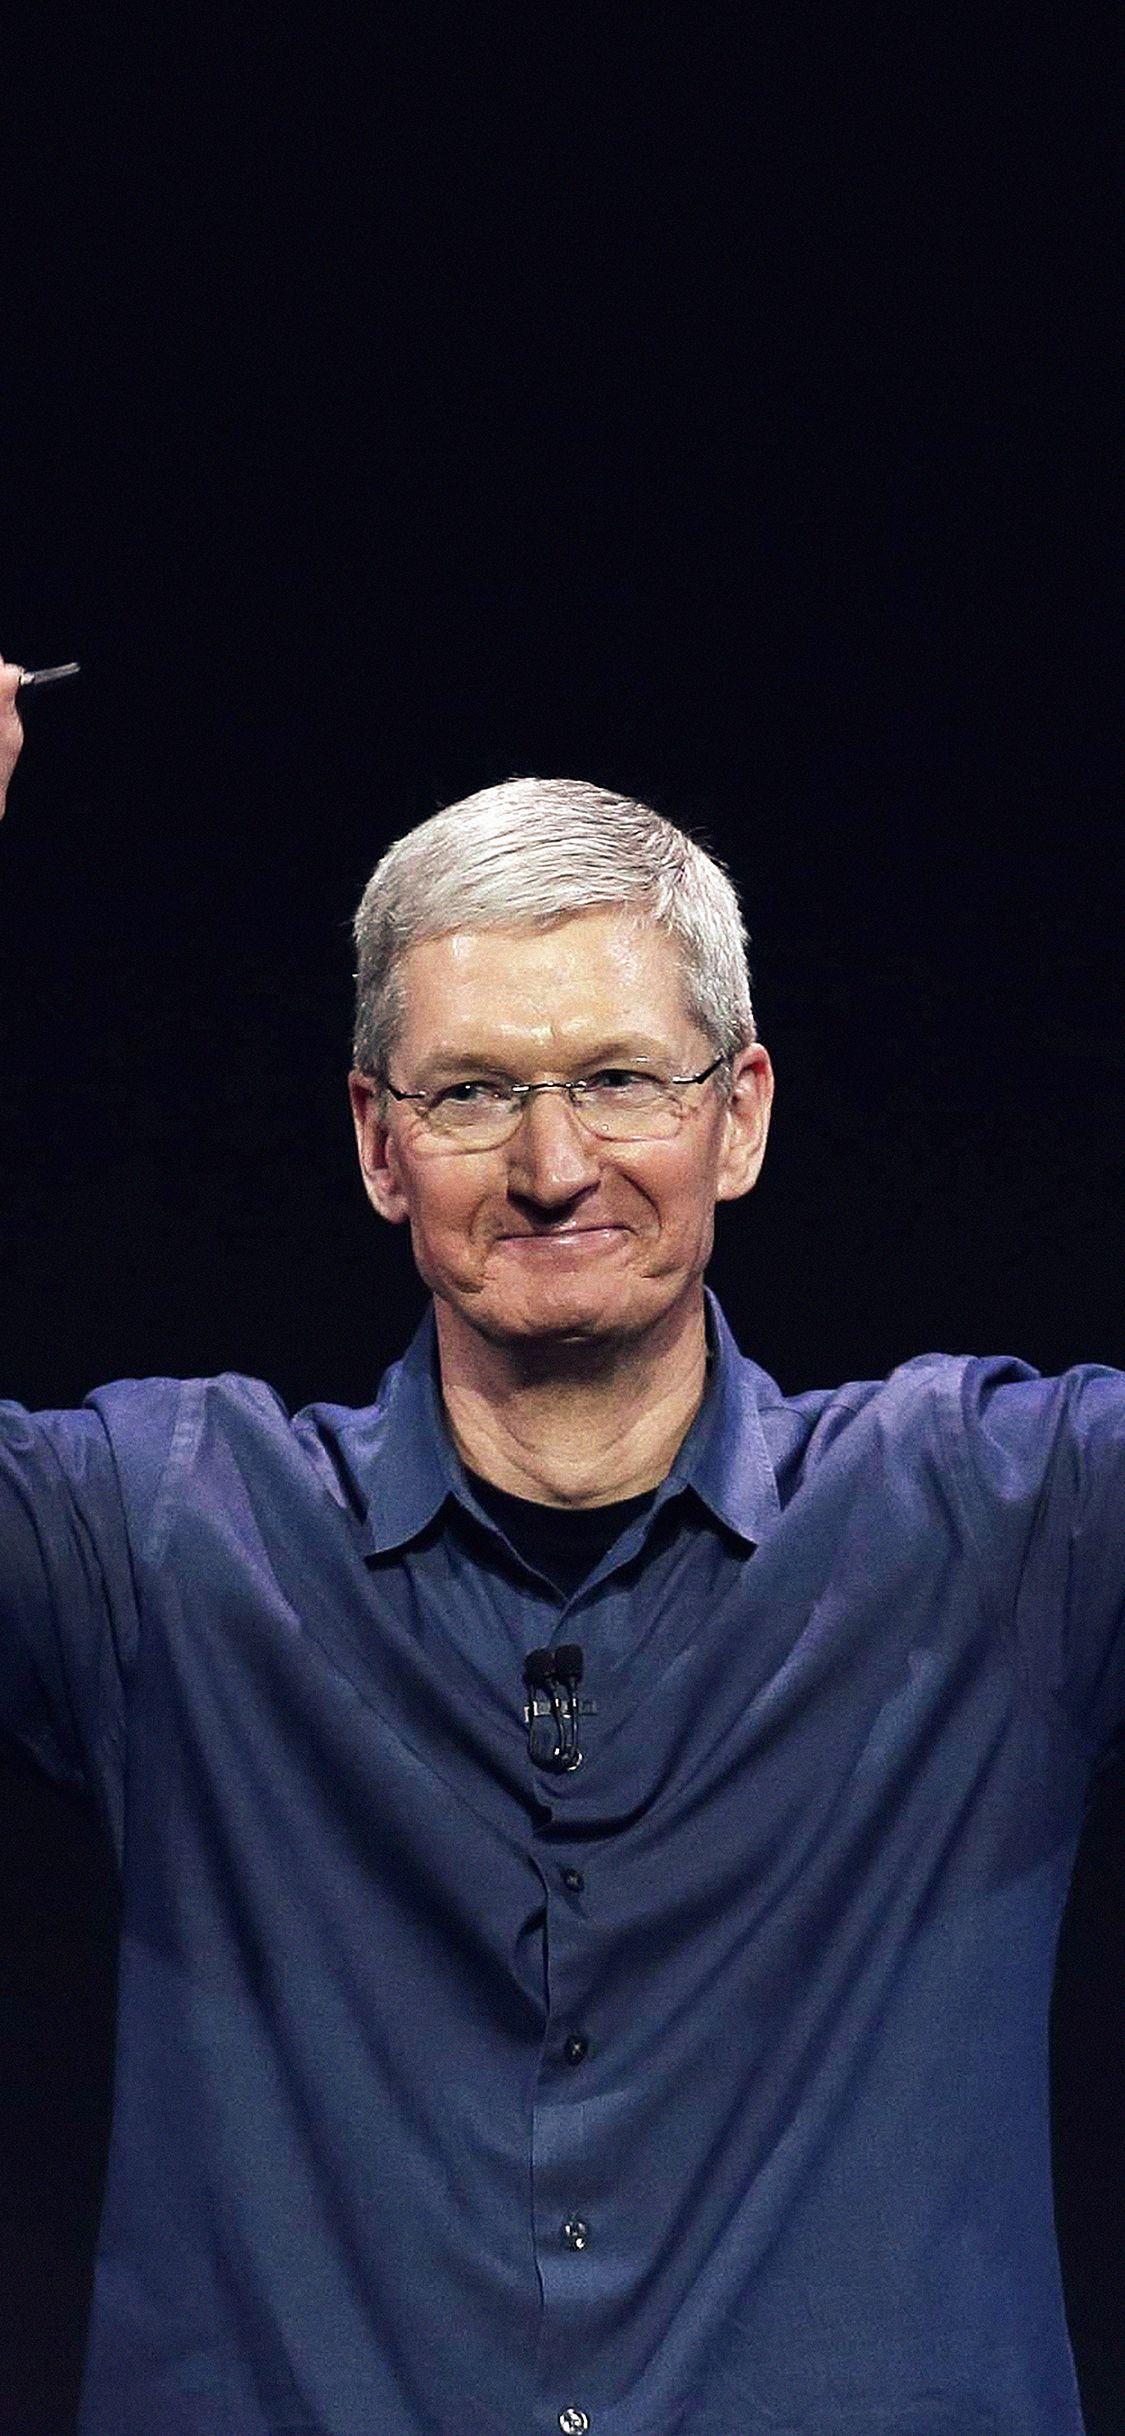 Tim Cook Wallpapers Top Free Tim Cook Backgrounds Wallpaperaccess